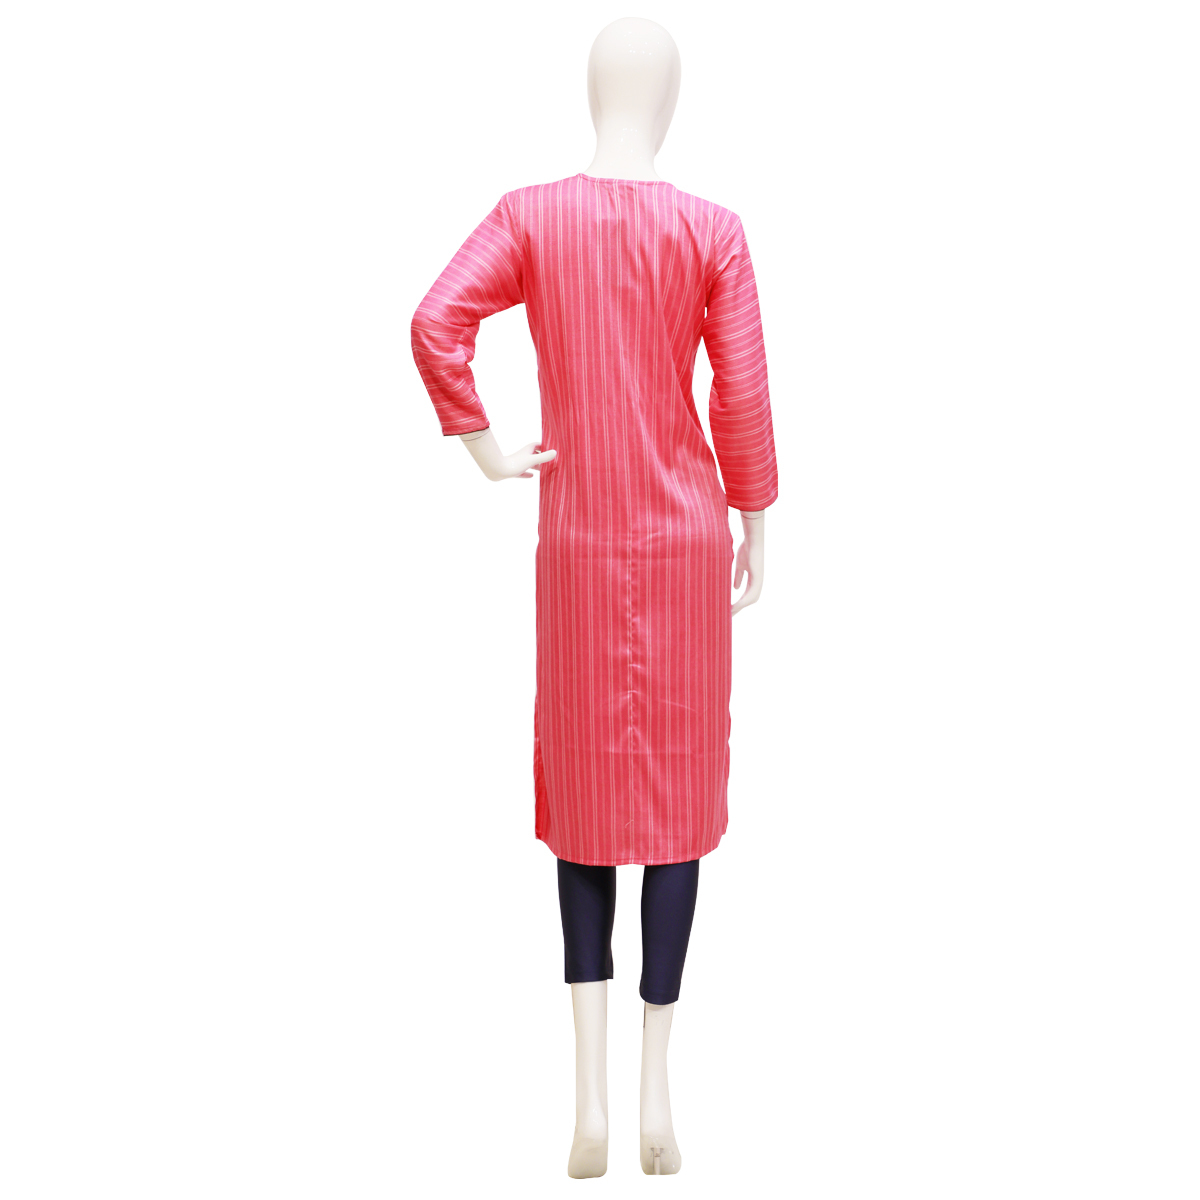 Yavi Straight Cut Kurta for Women with Embroidery Detailing - Pink